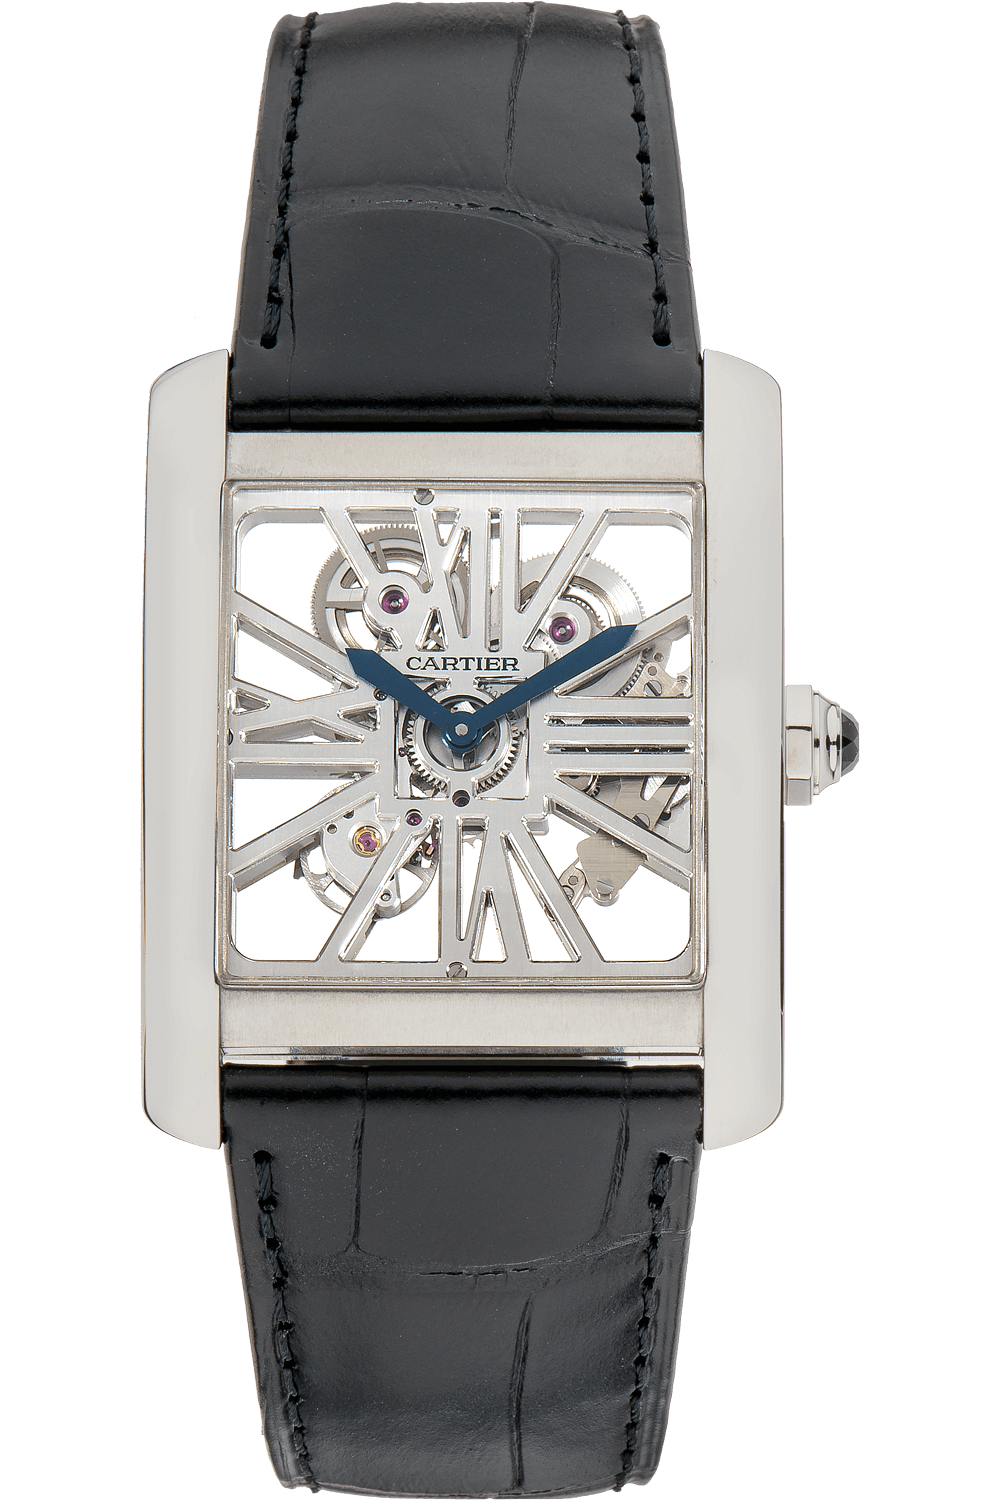 tourneau pre owned cartier watches